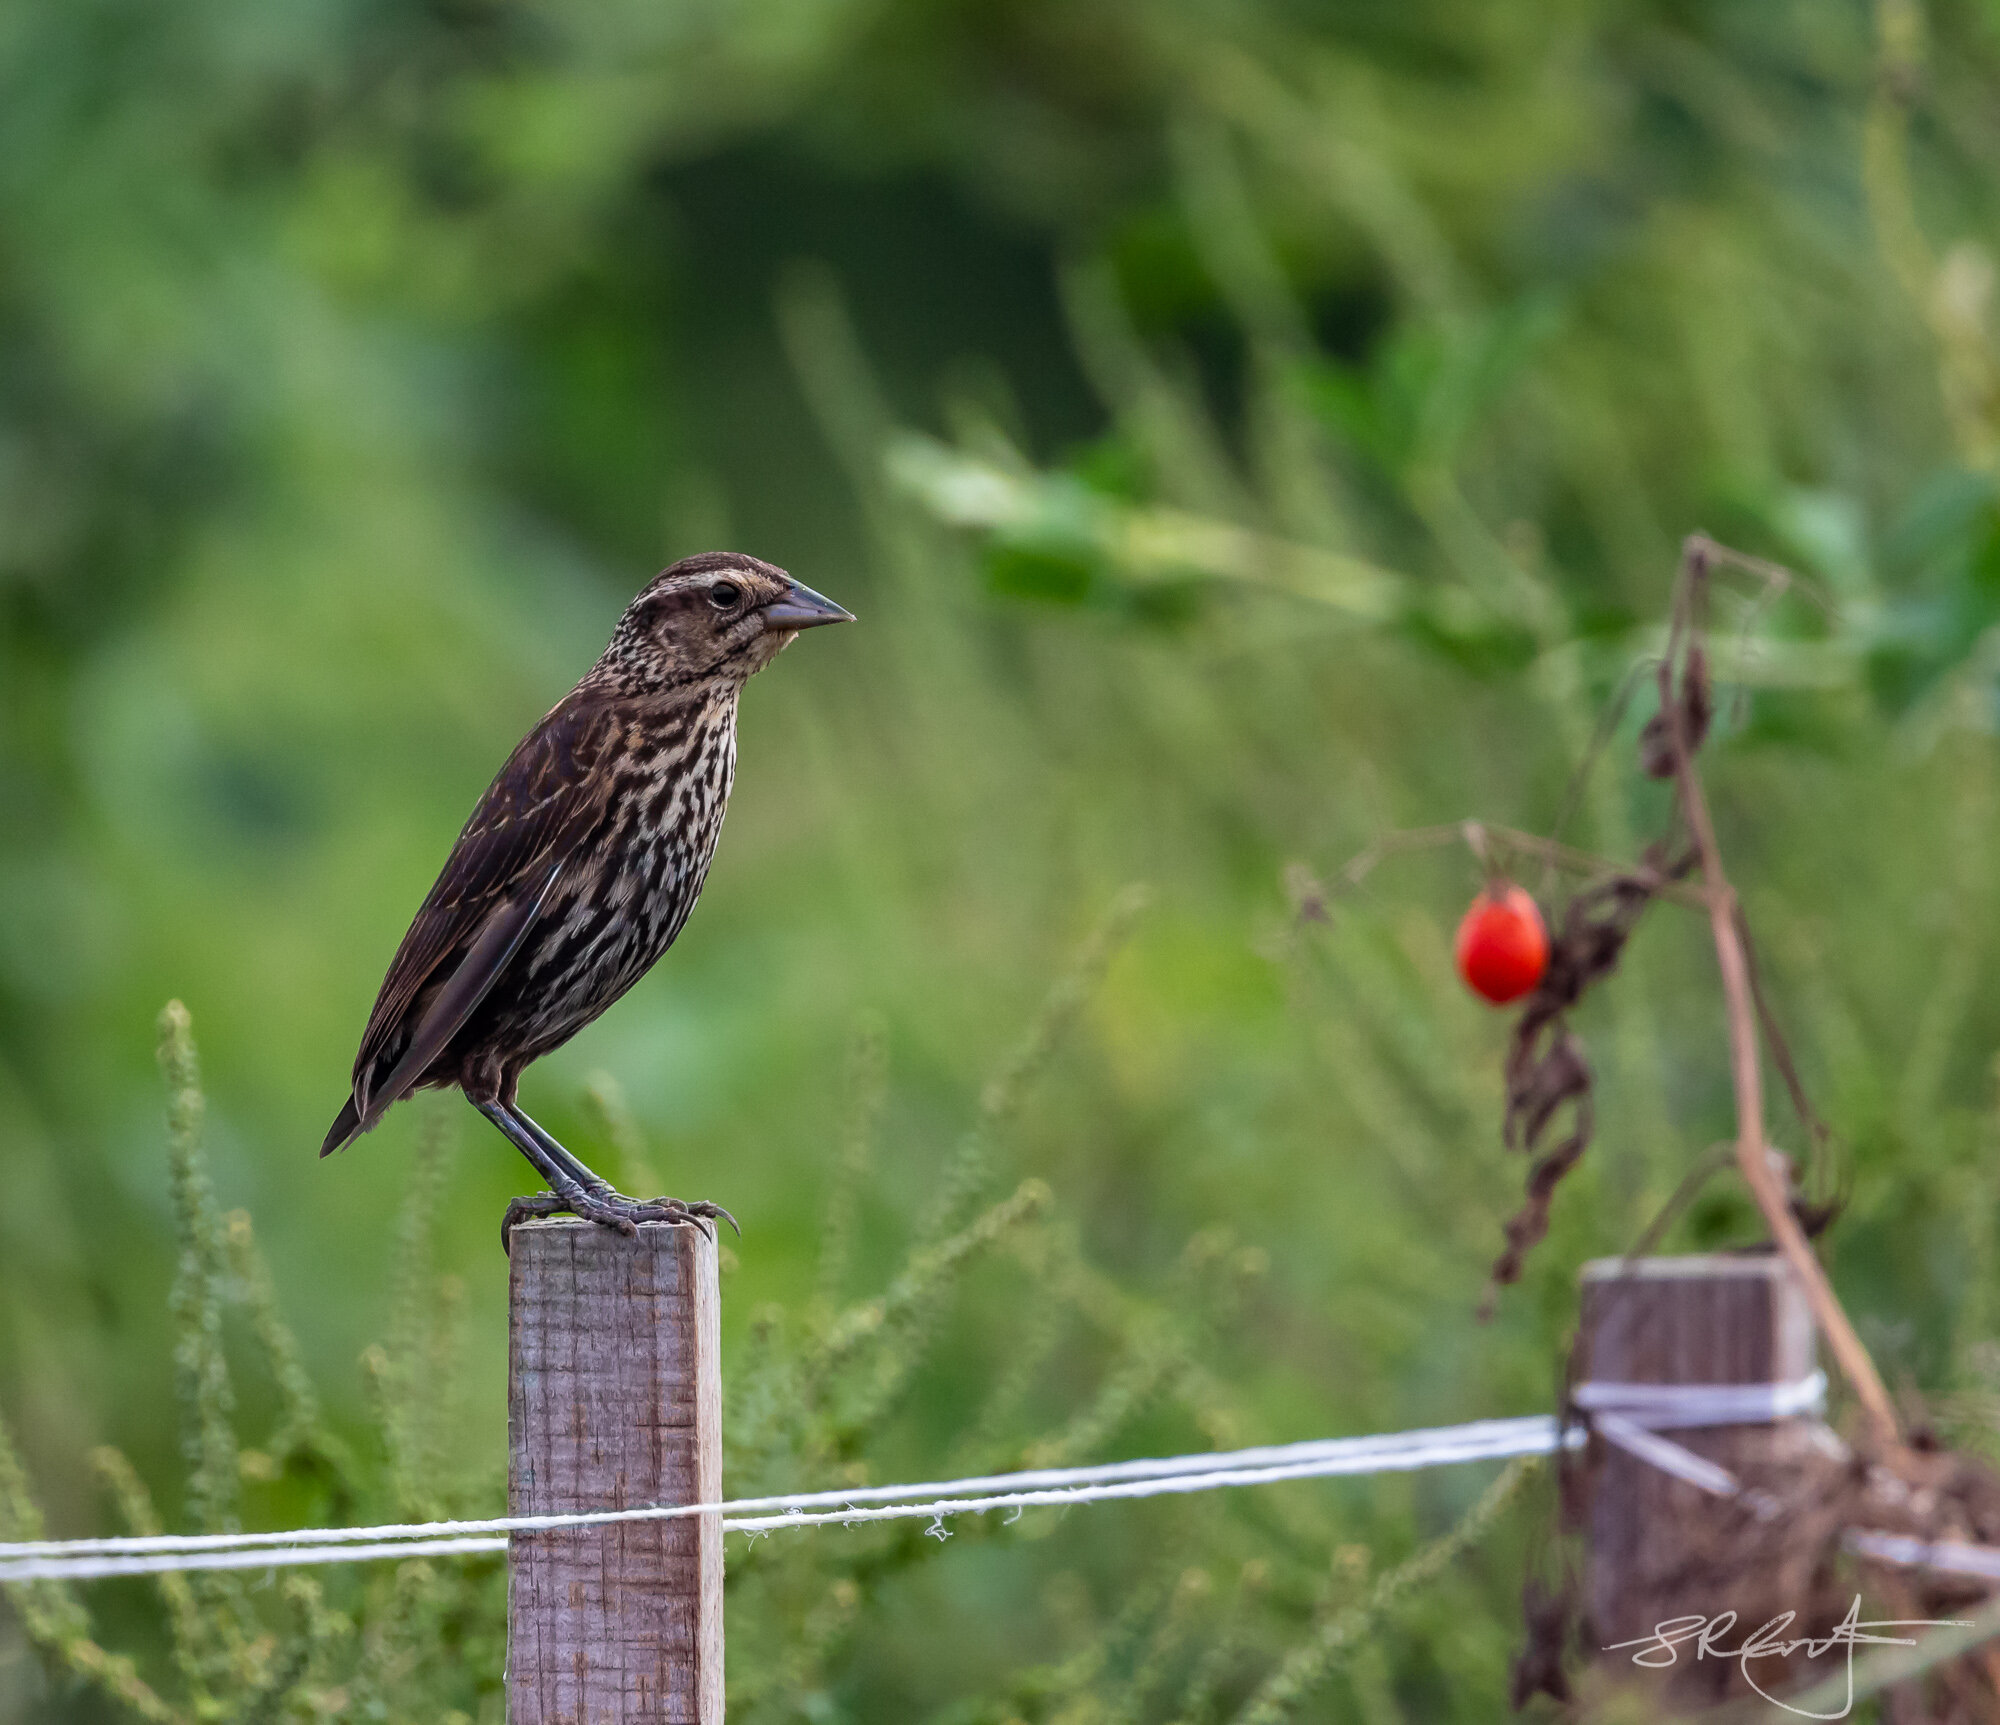 Female, RedWing Blackbird.  Quite different to the male.